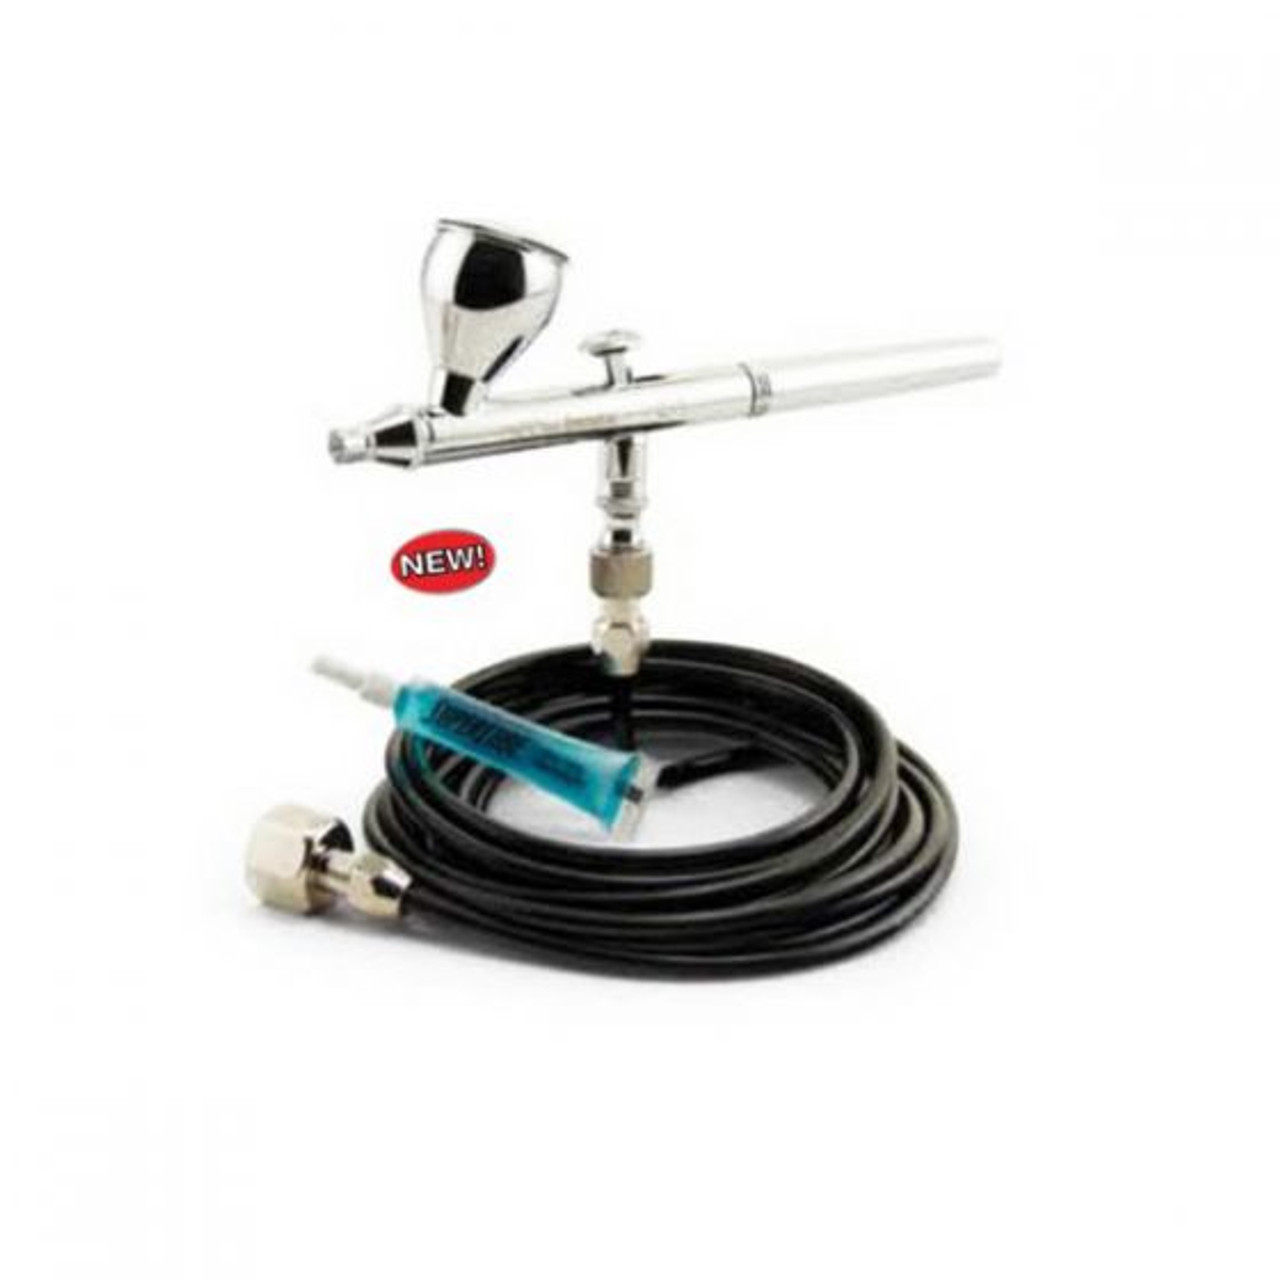 ANEST IWATA 4305 CN NEO Series Dual Action Gravity Feed Airbrush Set, Steel